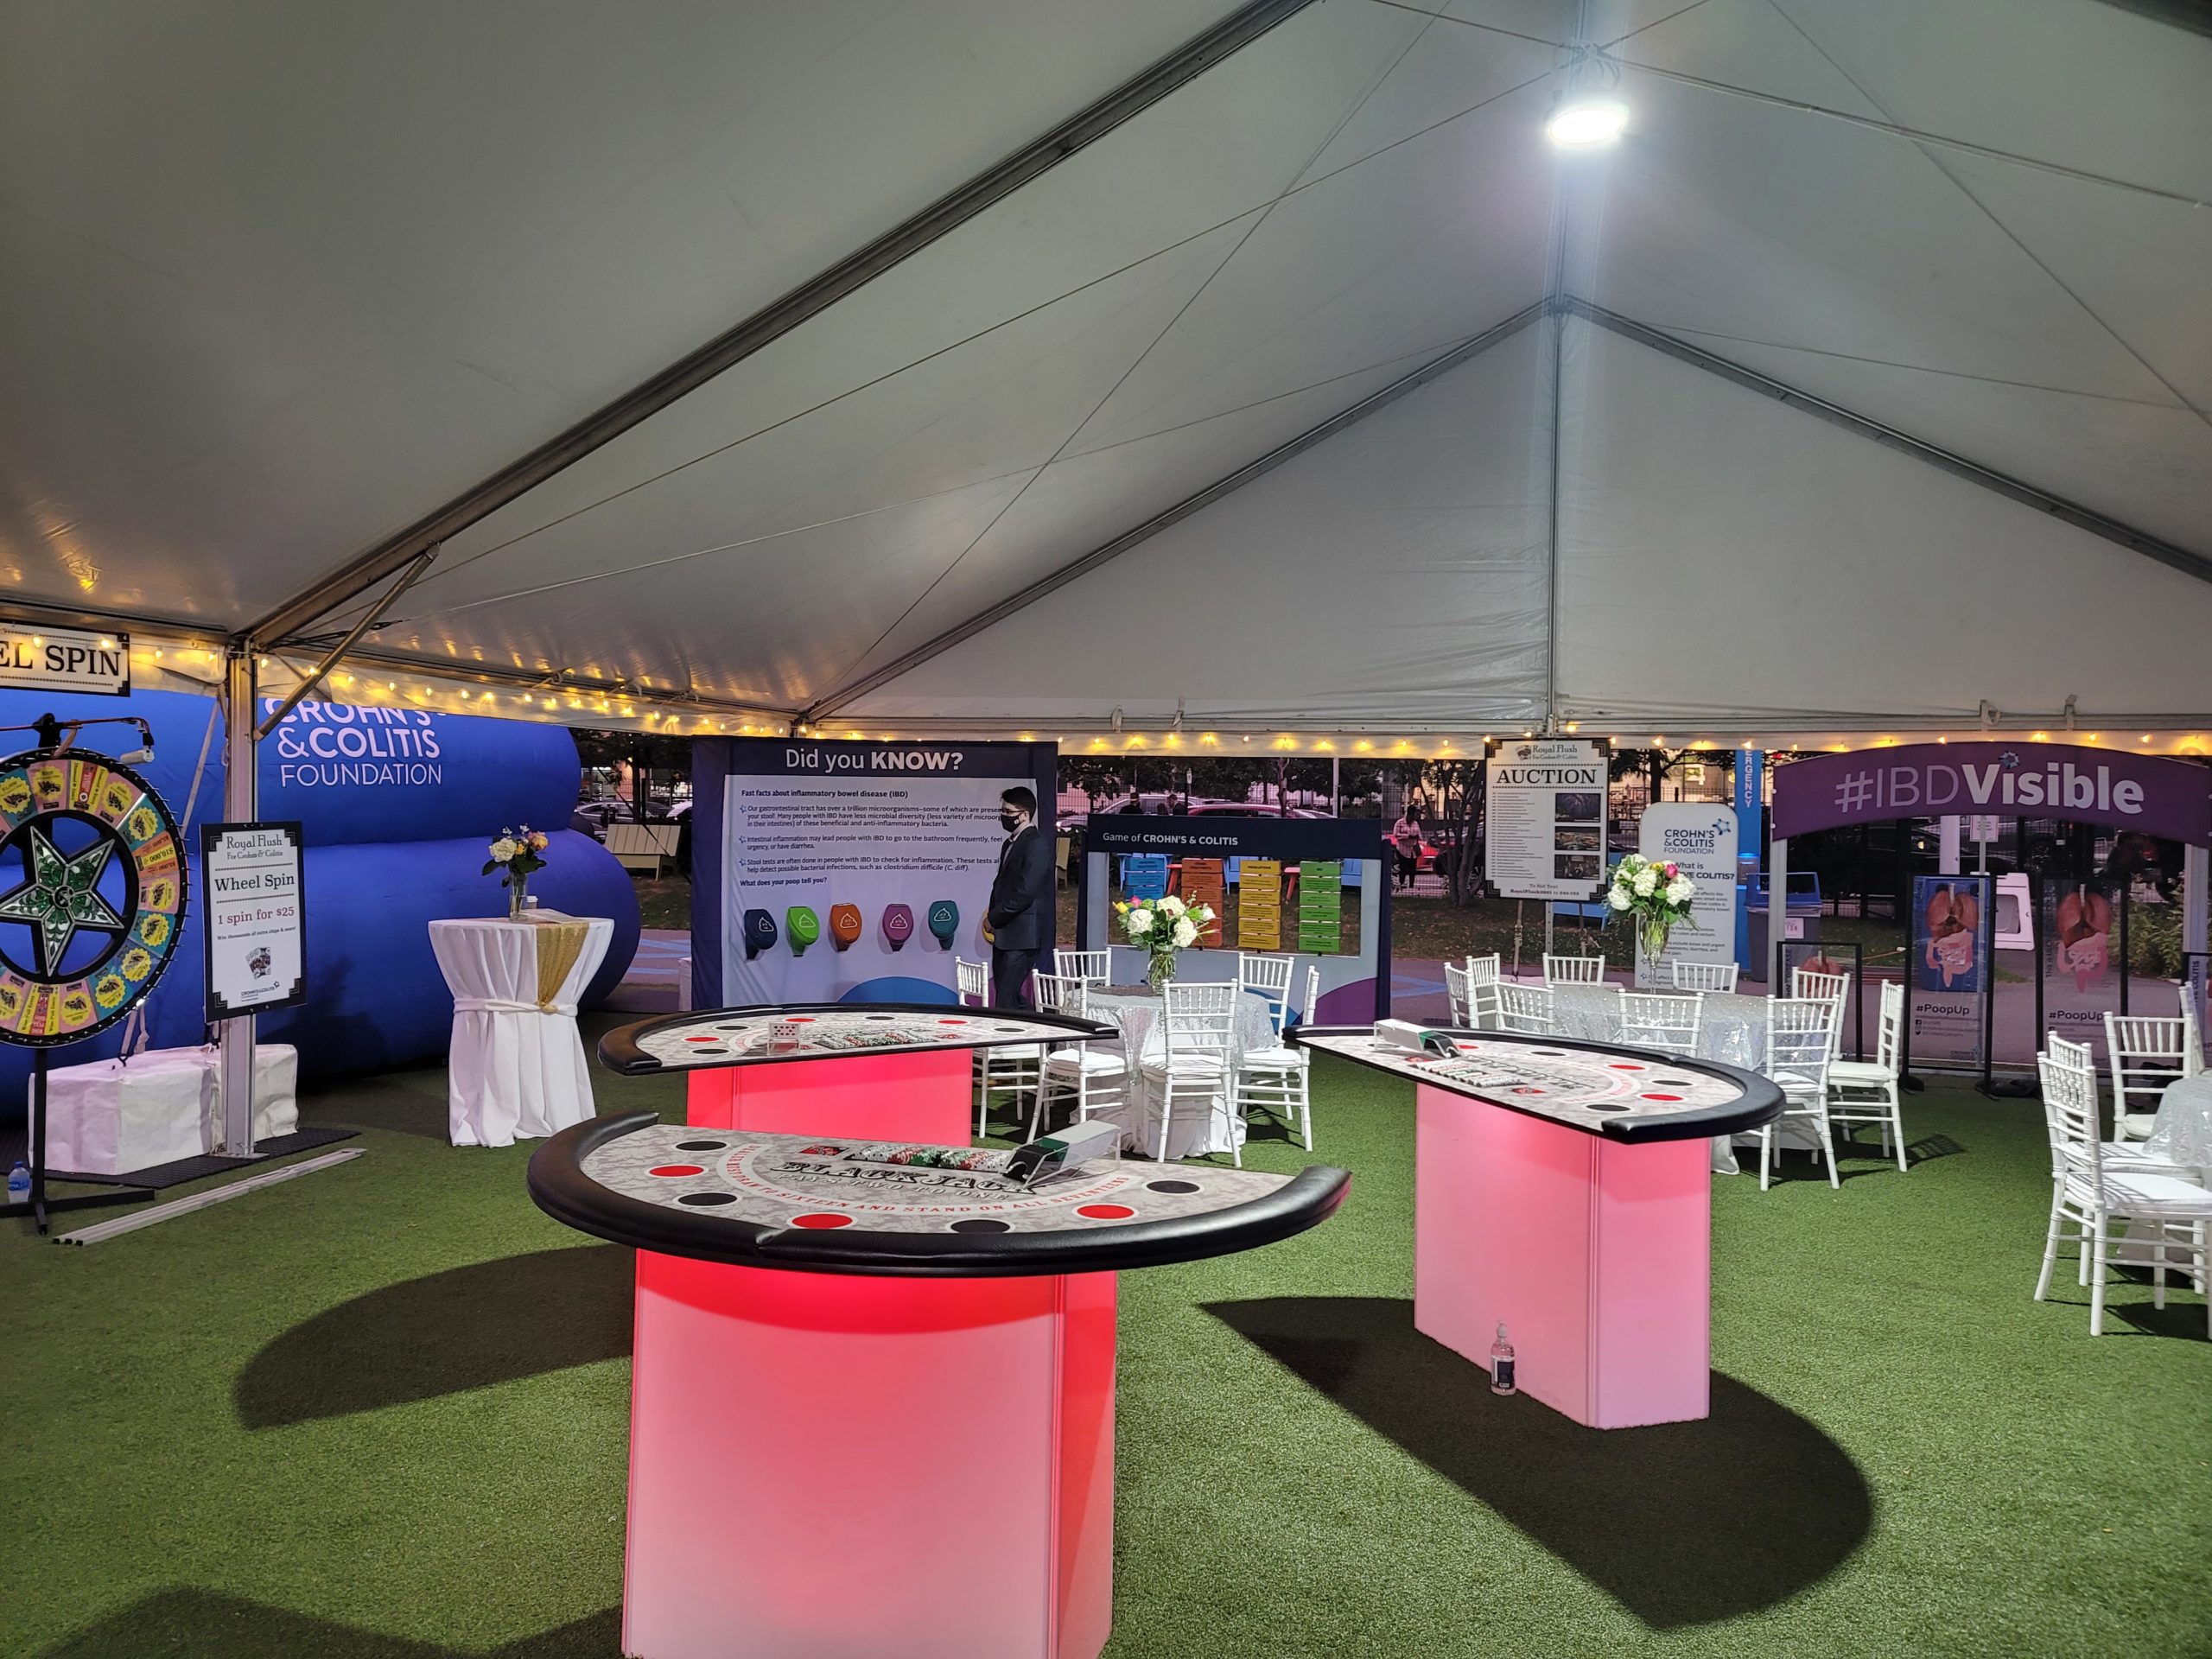 Crohn's and Colitis exhibits under a white tent